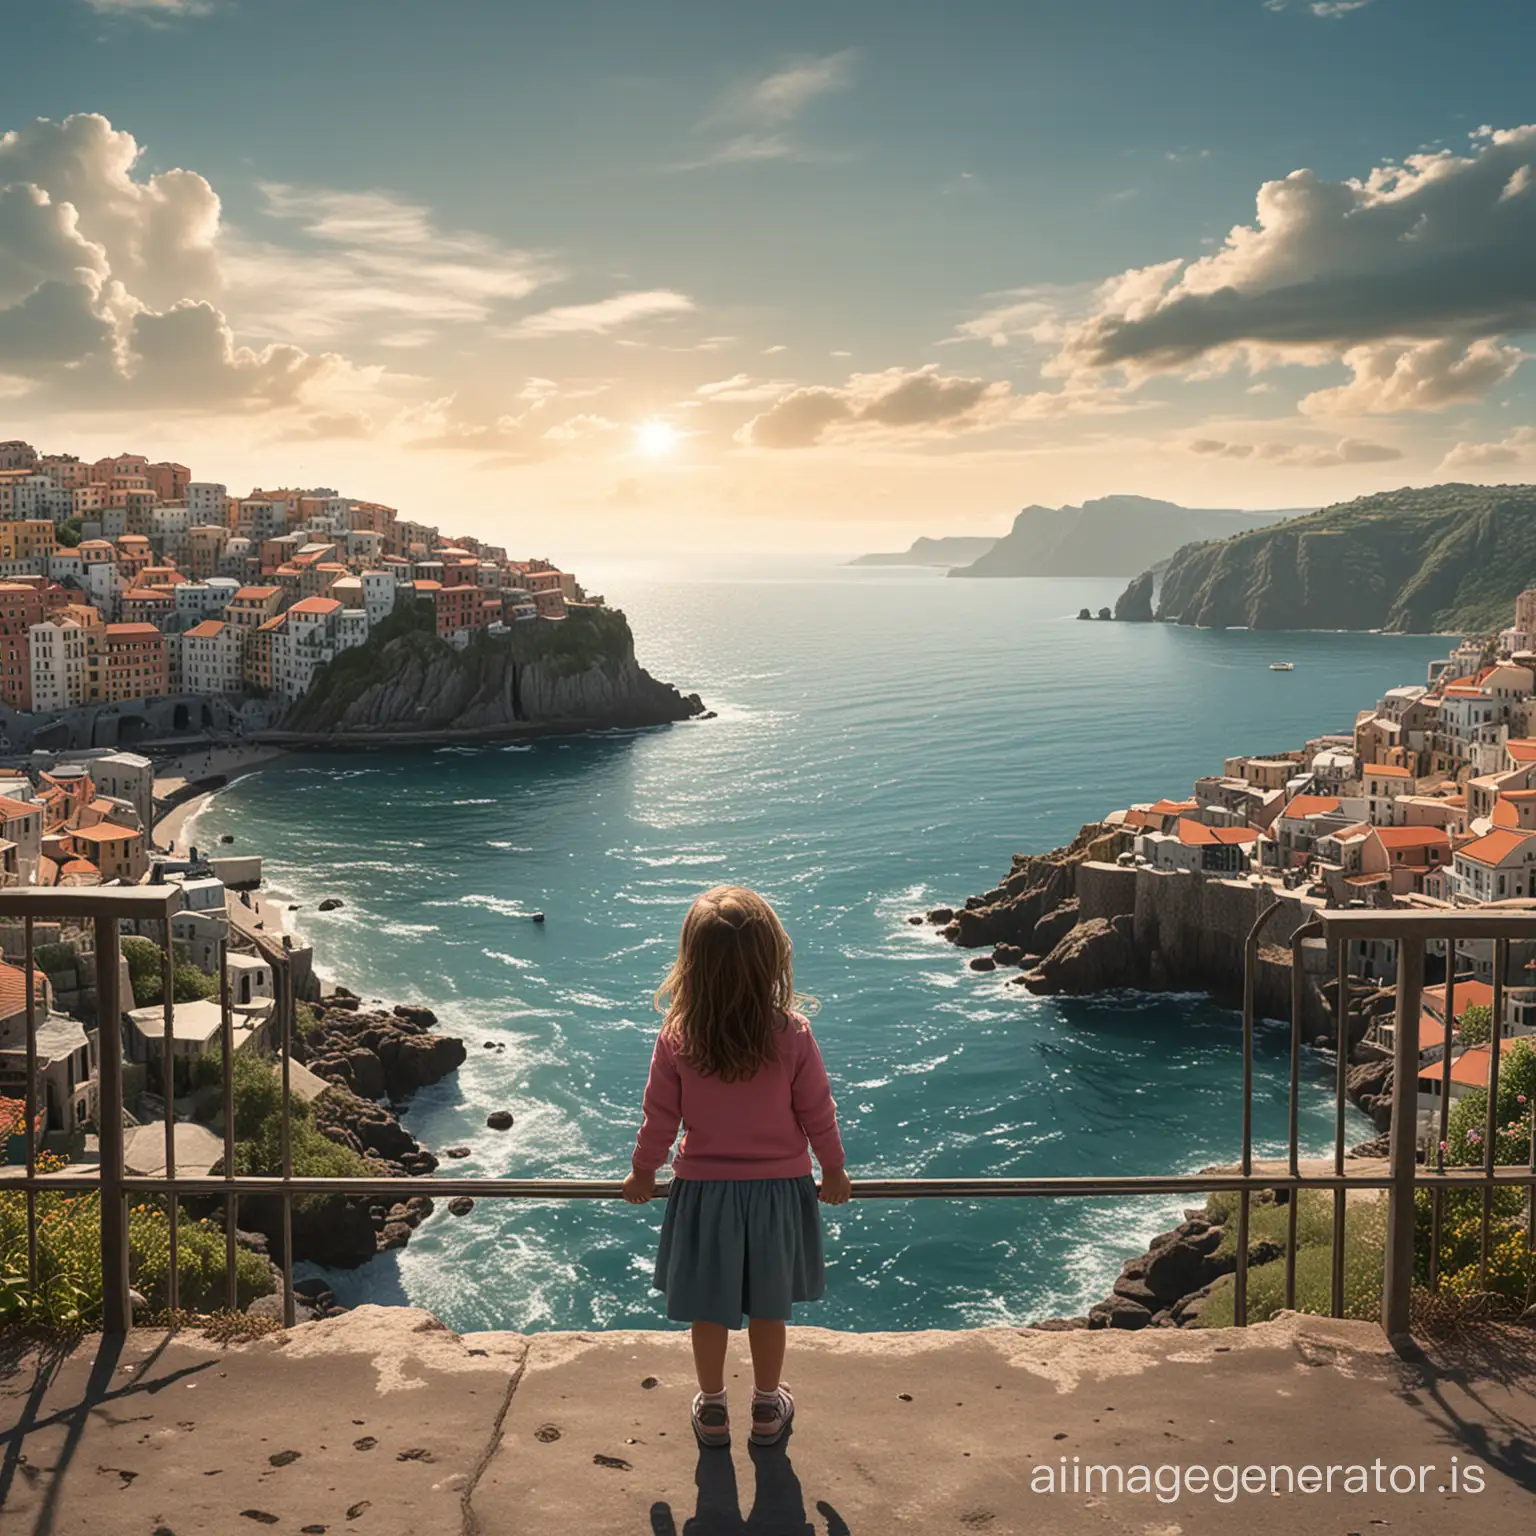 A Little girl in a city looking across sea at a human on an isle